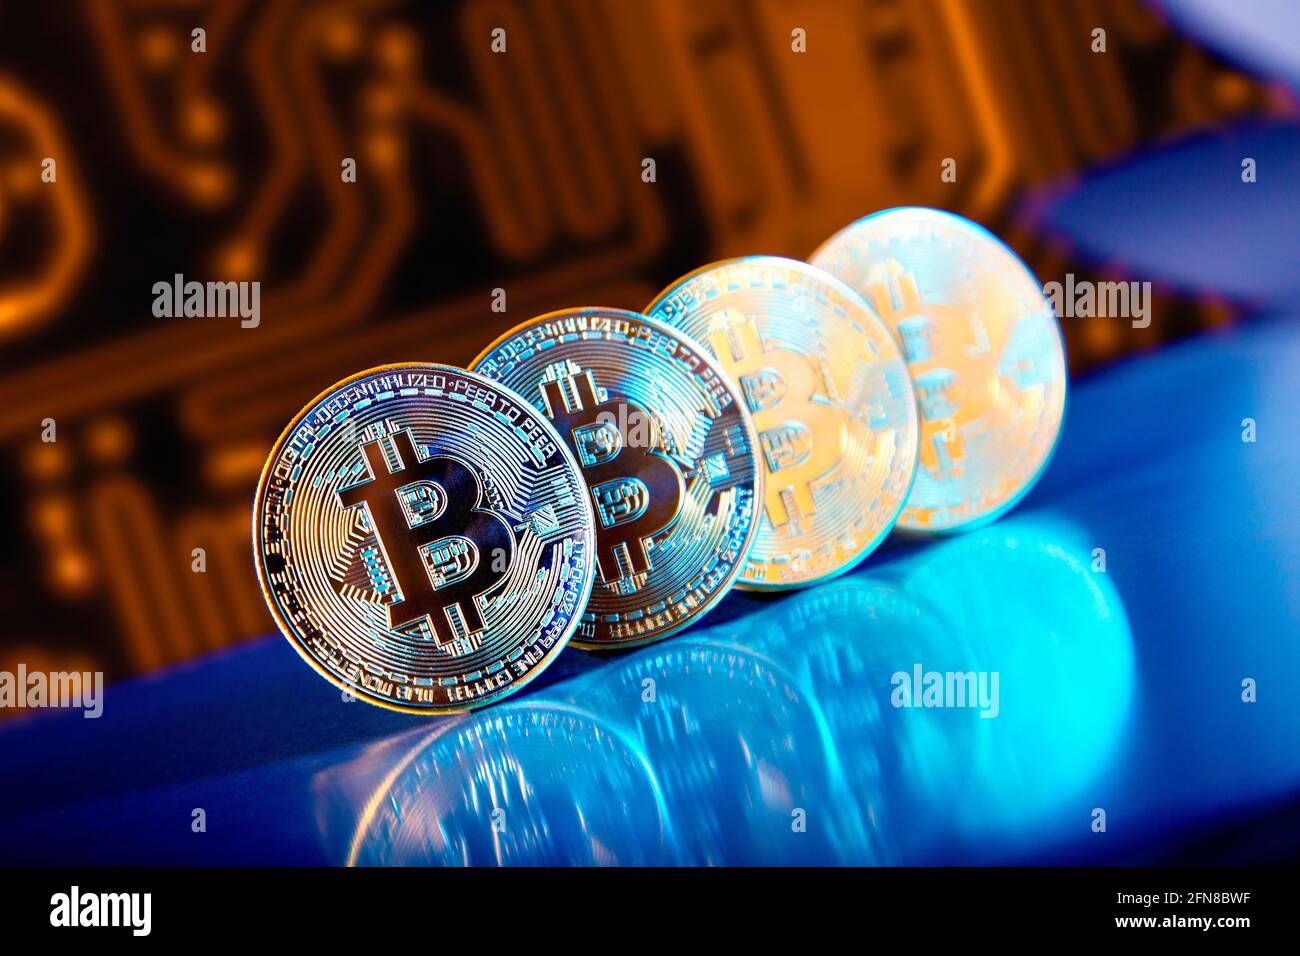 Bitcoin cryptocurrency coins against circuit board pattern Stock Photo